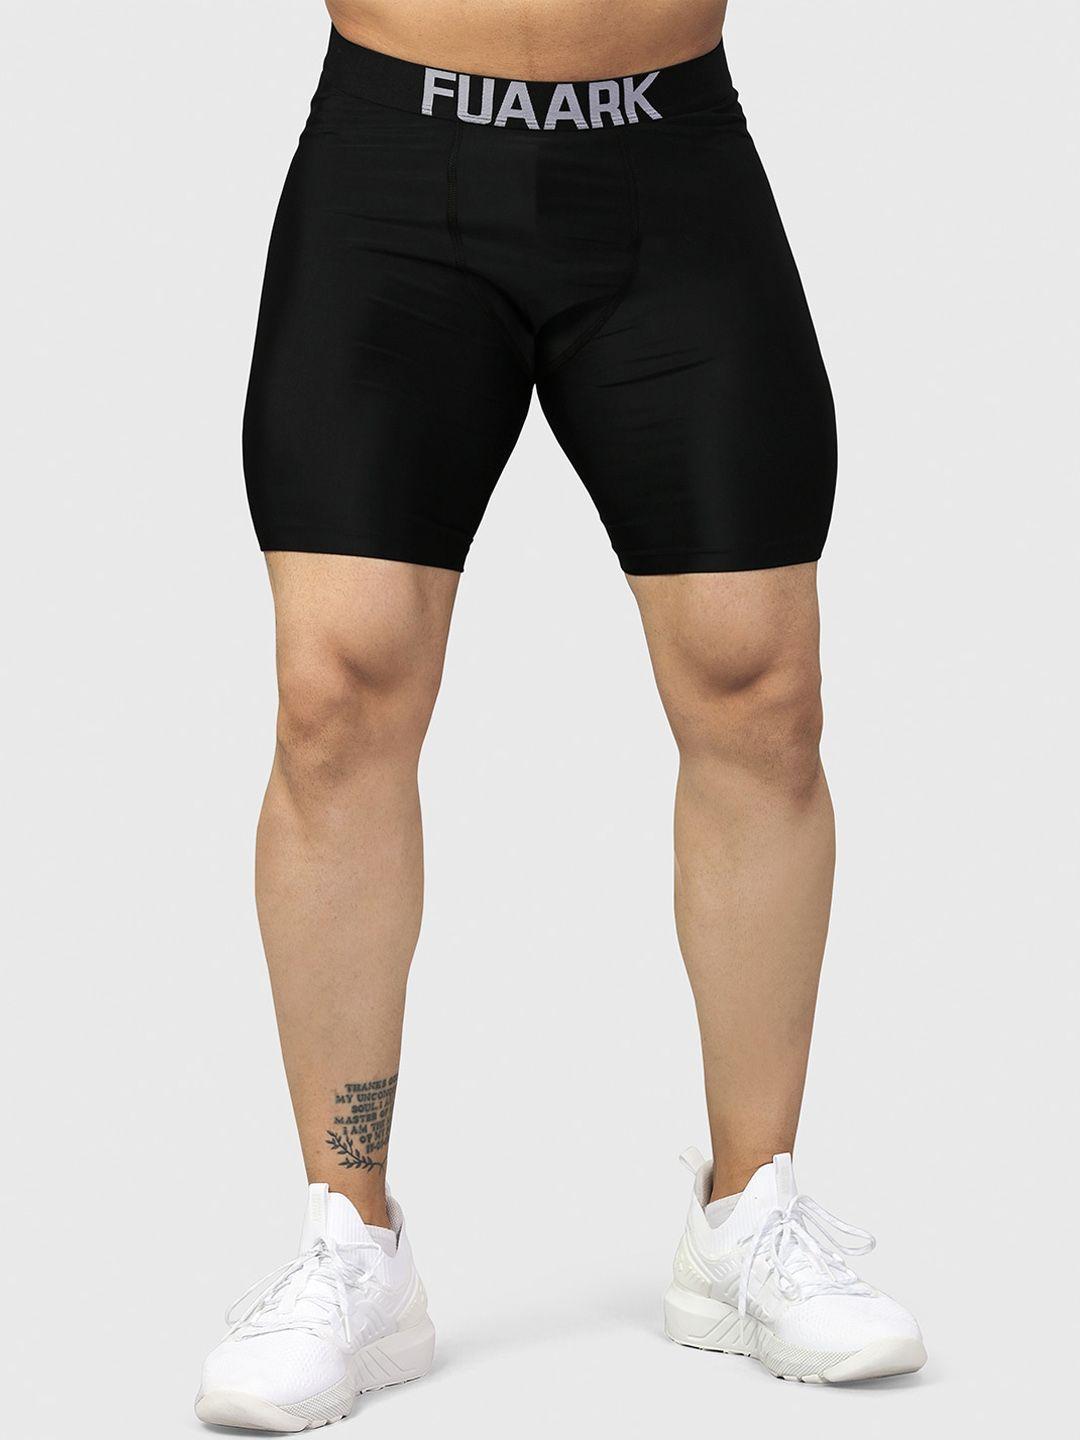 fuaark-men-skinny-fit-training-or-gym-rapid-dry-sports-shorts